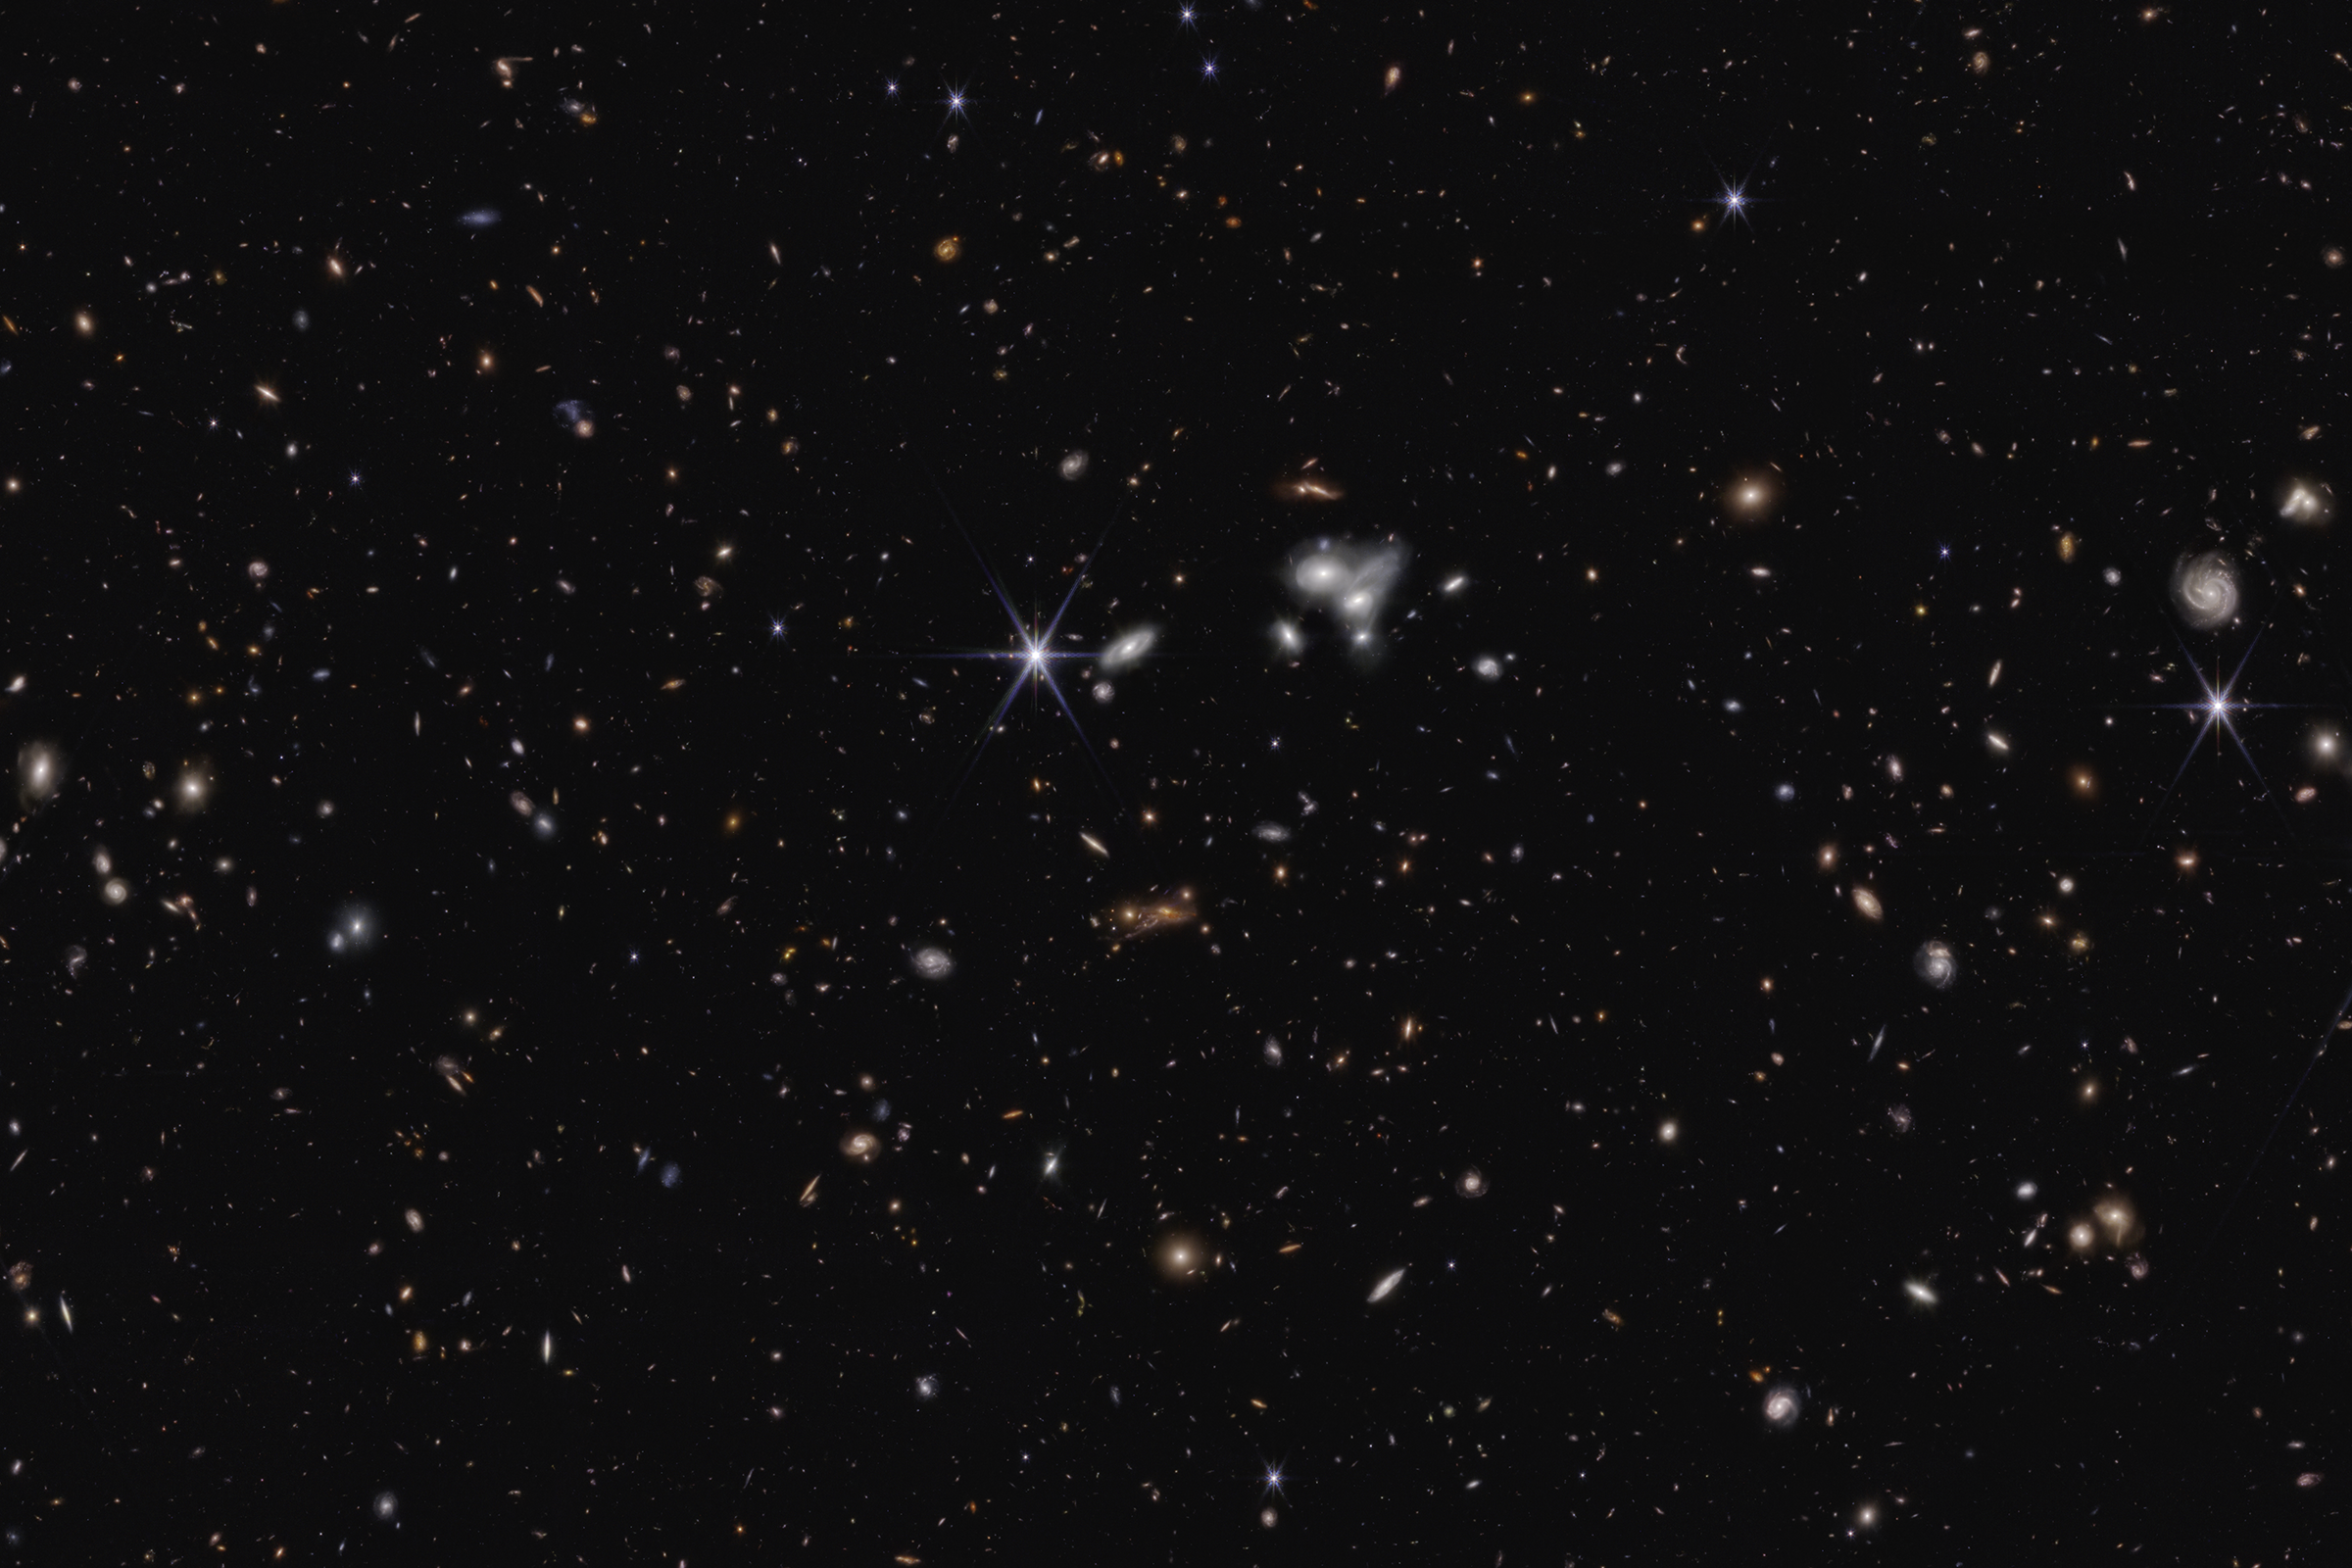 A dense field of galaxies set against a black background of space